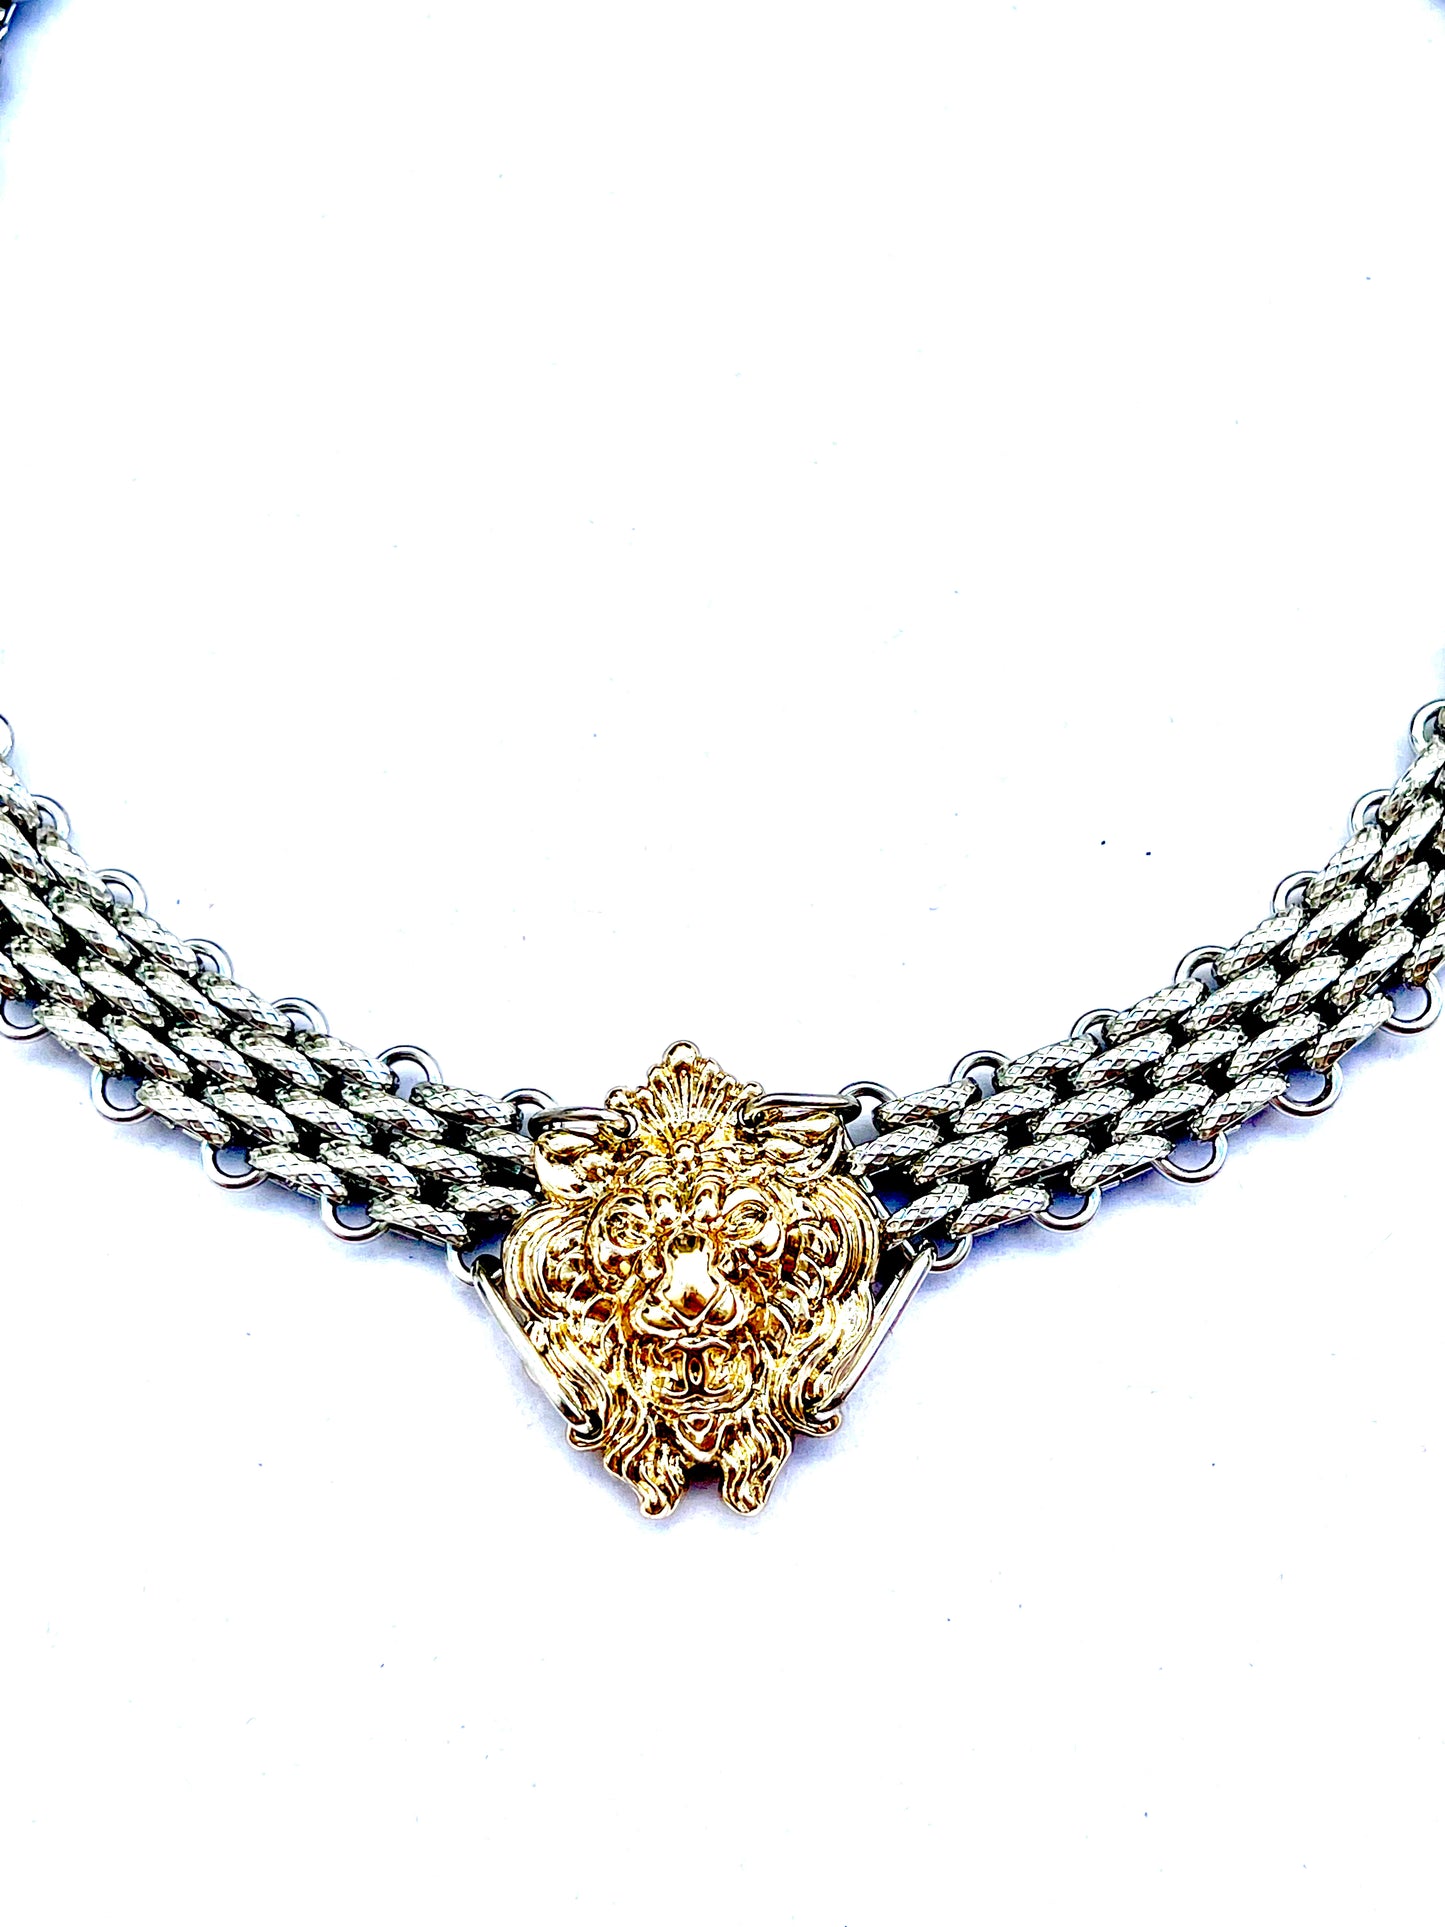 Vintage CC Iconic Lion Choker Re-Worked Necklace